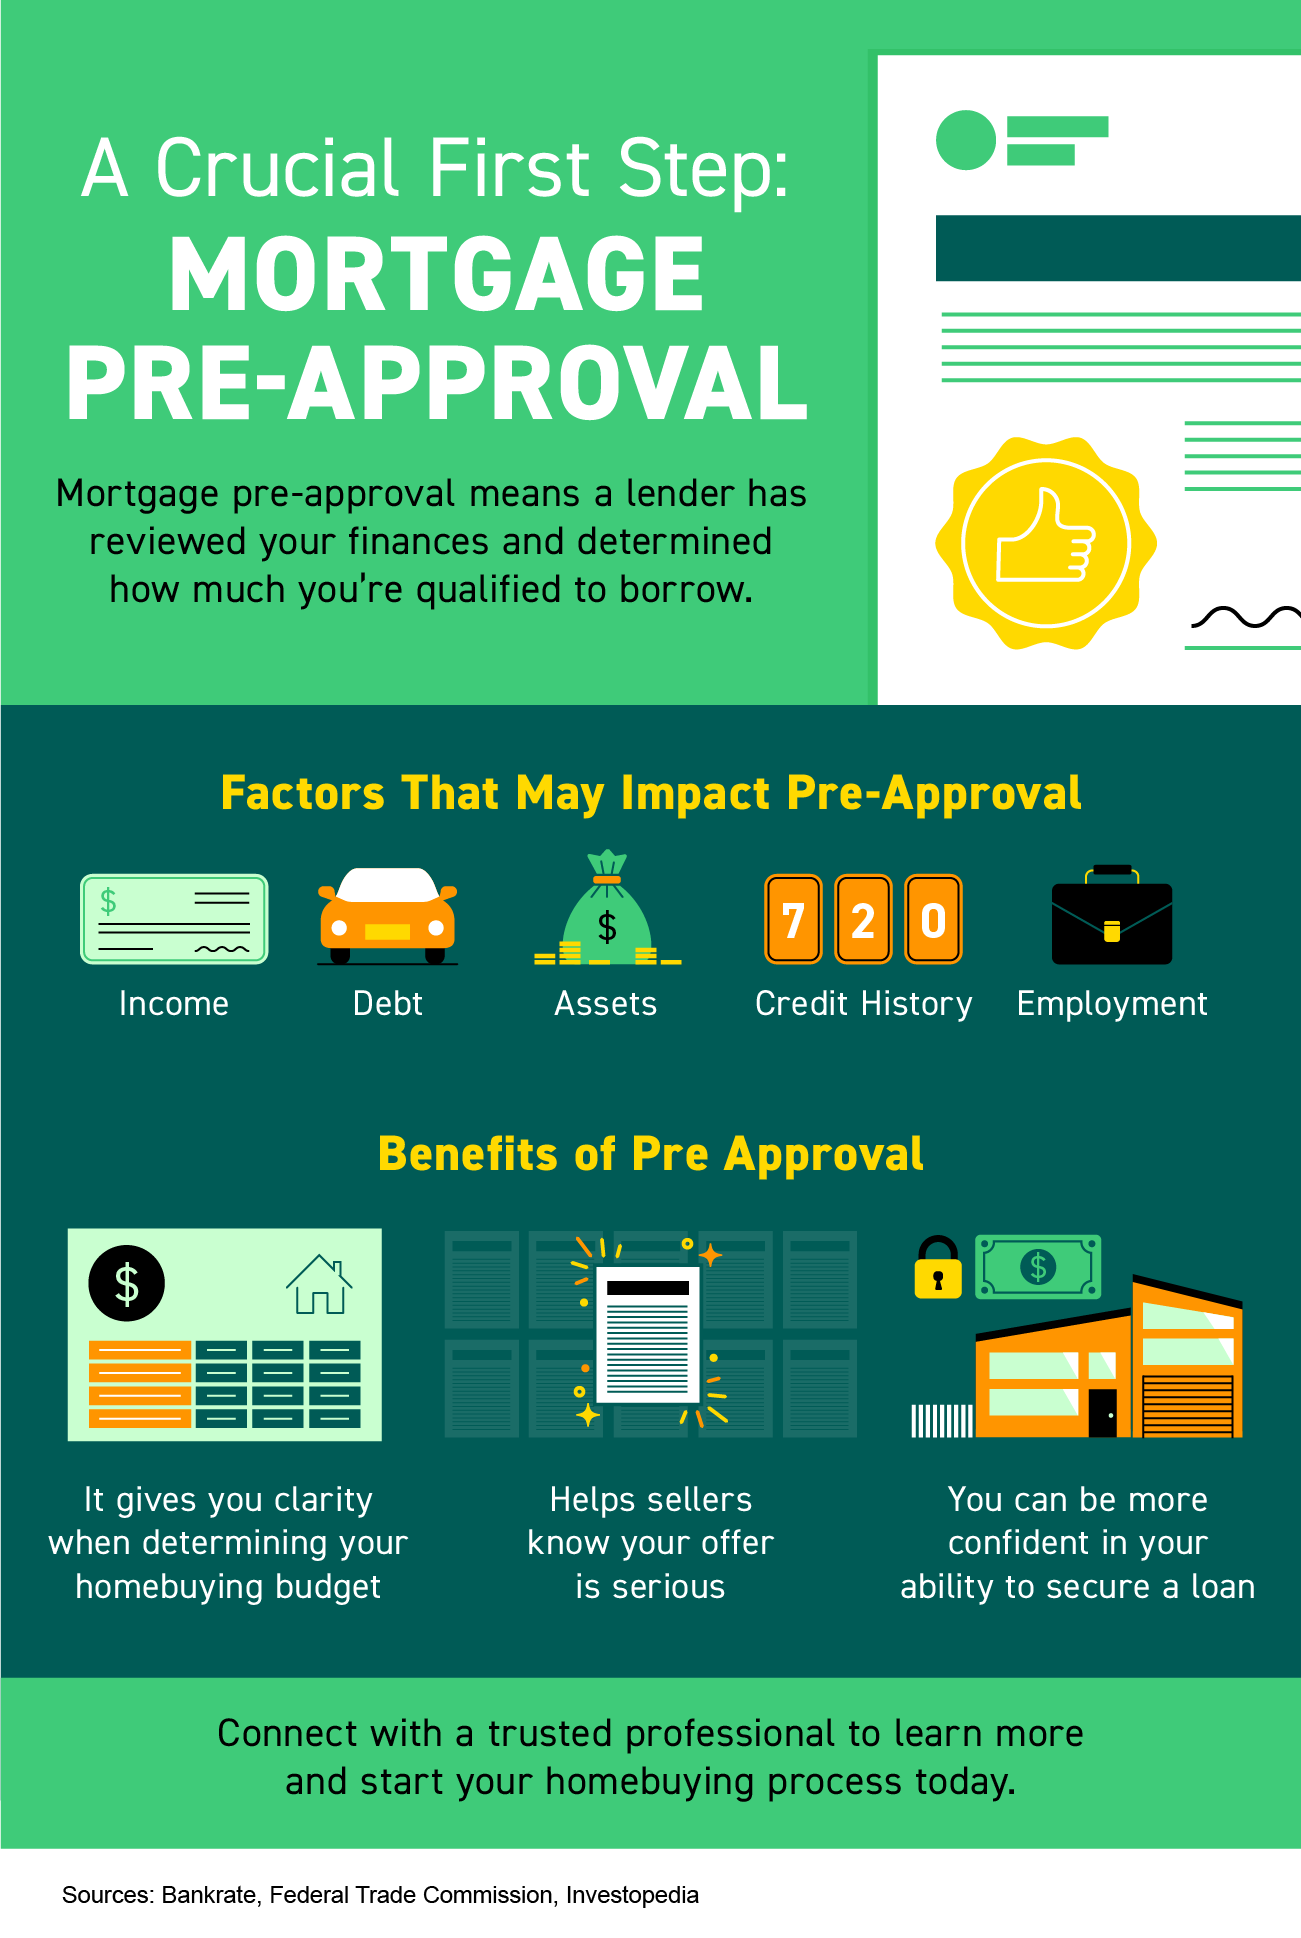 Mortgage pre-approval